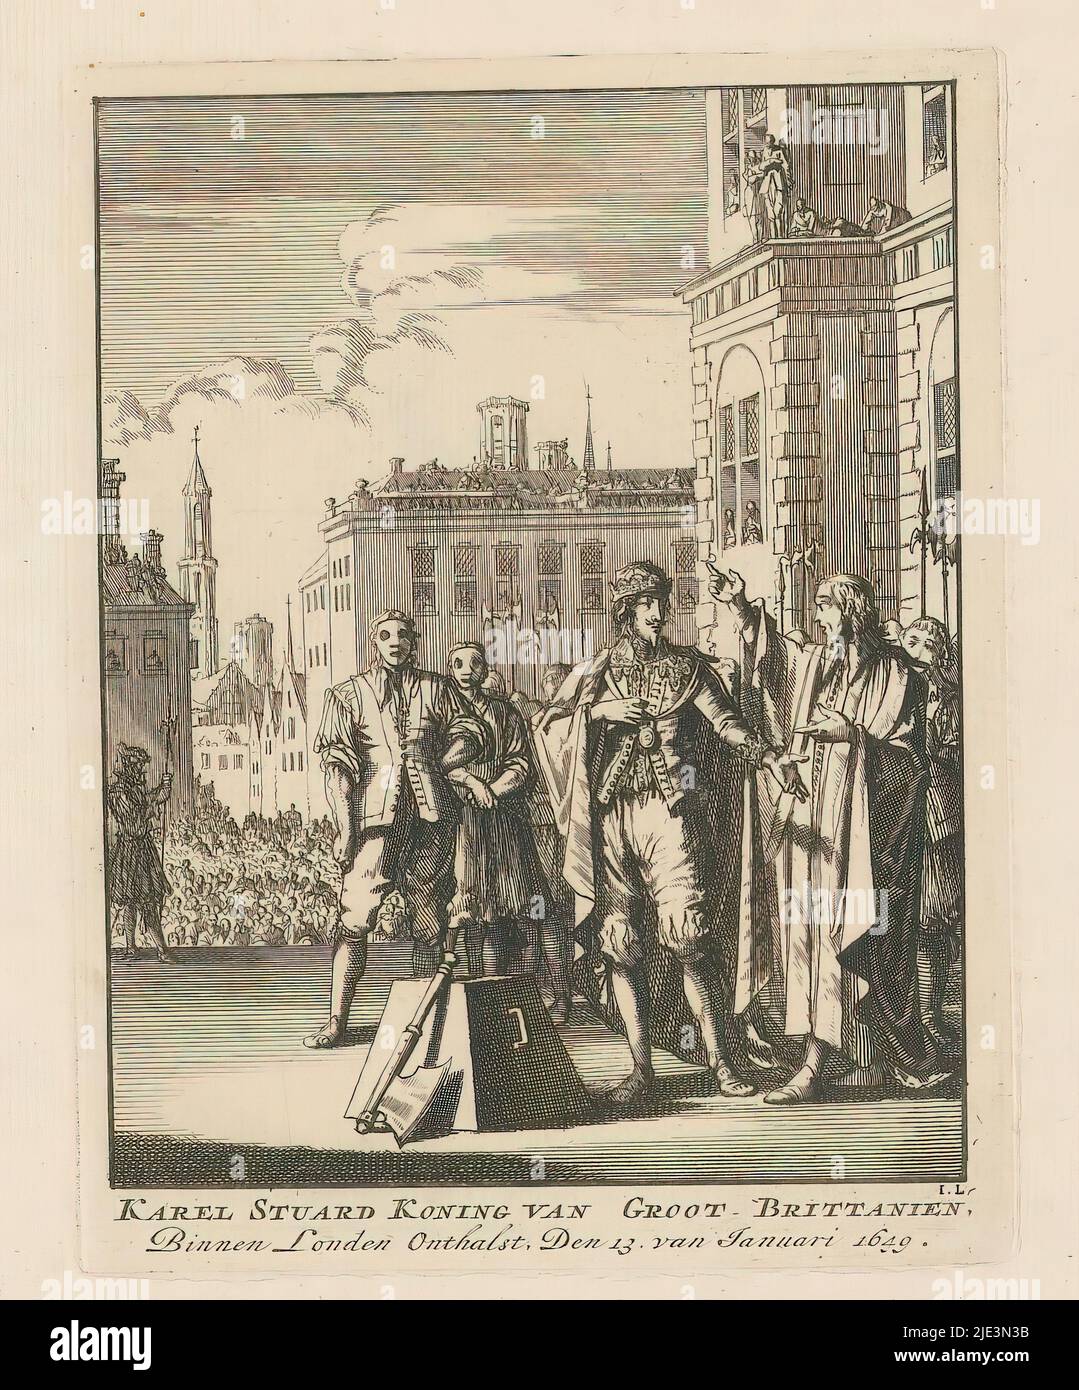 Beheading of Charles I, King of England, in London, 1649, Charles Stuard King of Great Britain, Within London Abstained, Den 13. of January 1649 (title on object), Charles I, King of England, at the scaffold, before his beheading on 30 January 1649., print maker: Jan Luyken, (mentioned on object), England, 1698, paper, etching, height 187 mm × width 145 mm Stock Photo